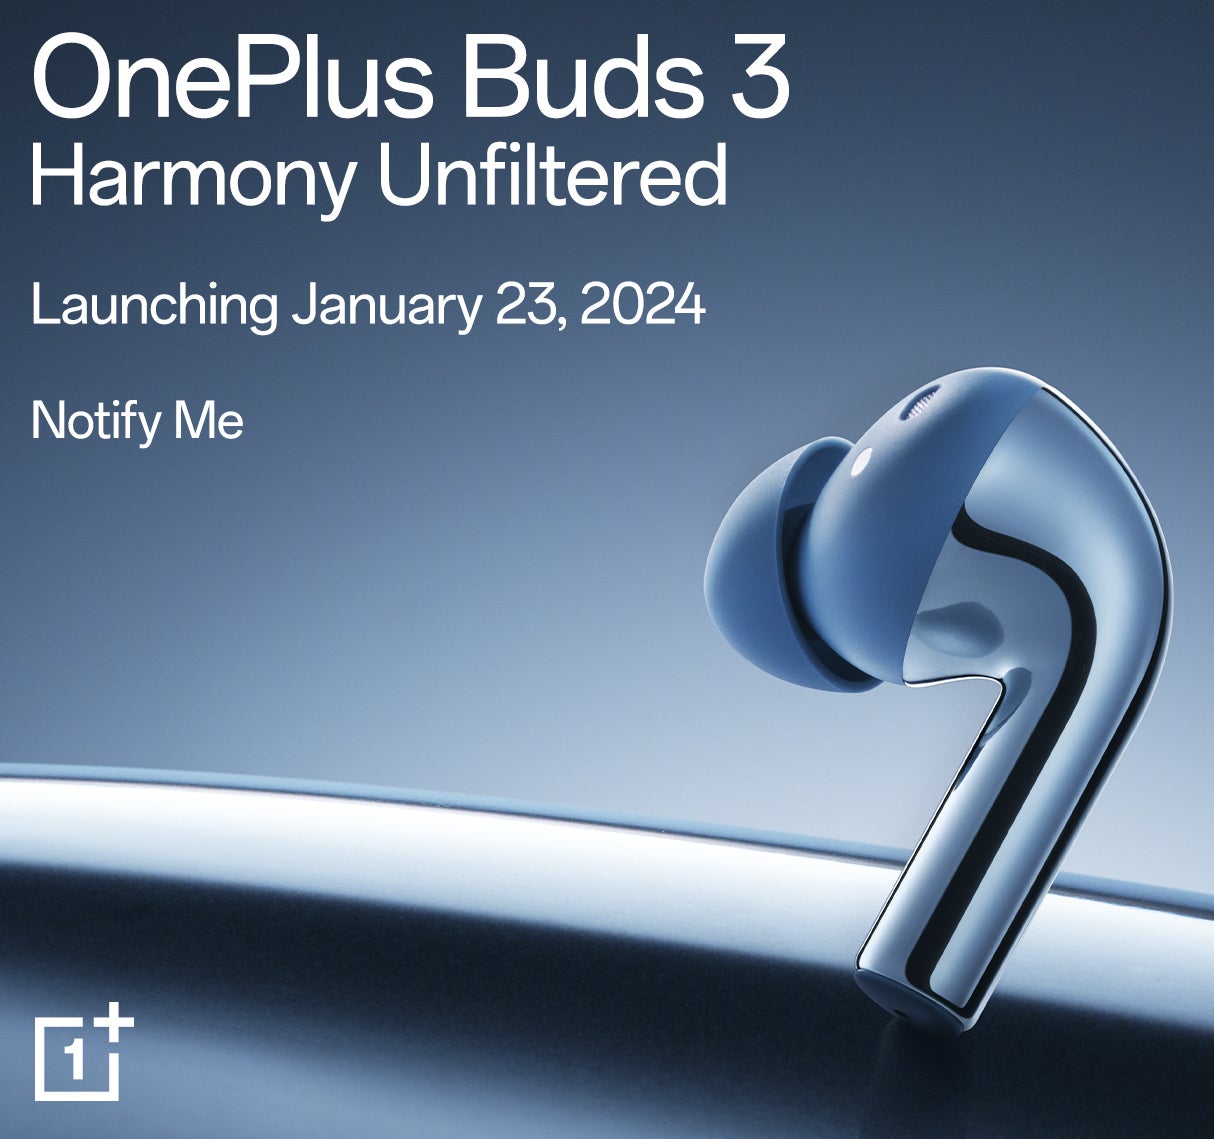 OnePlus Buds 3 coming to the US on January 23